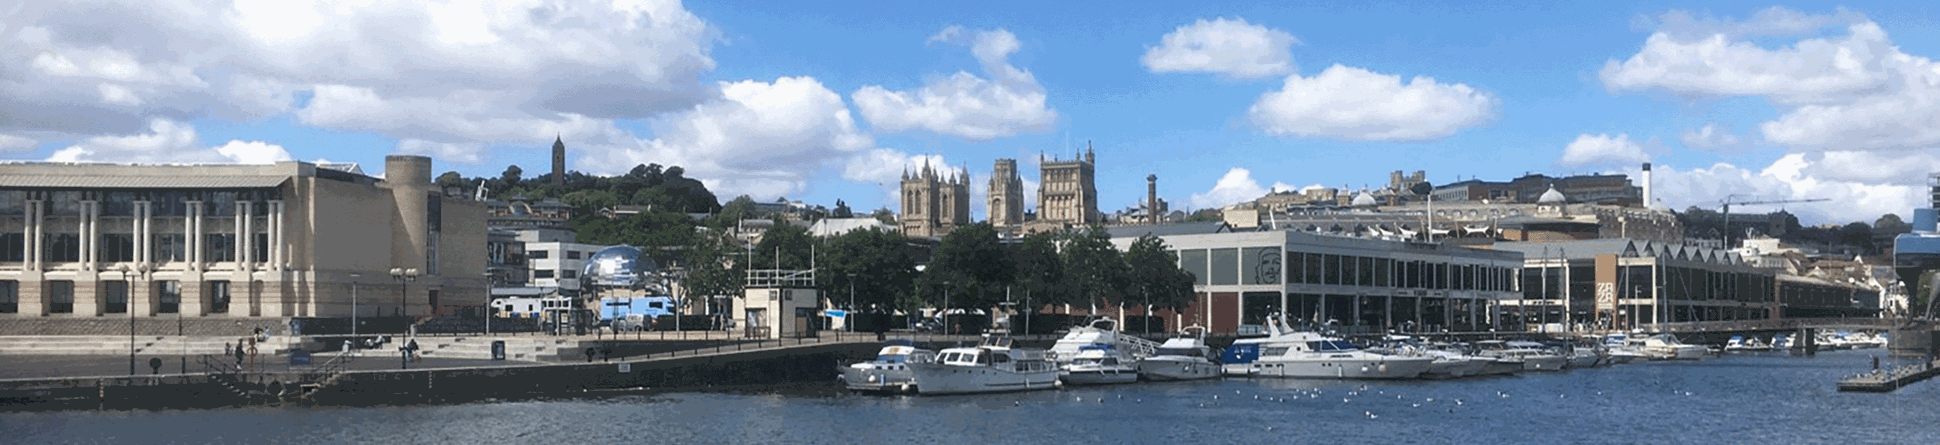 A view across the river towards Bristol's harbourside buildings. The towers of Bristol Cathedral can be seen rising above in the middle ground.